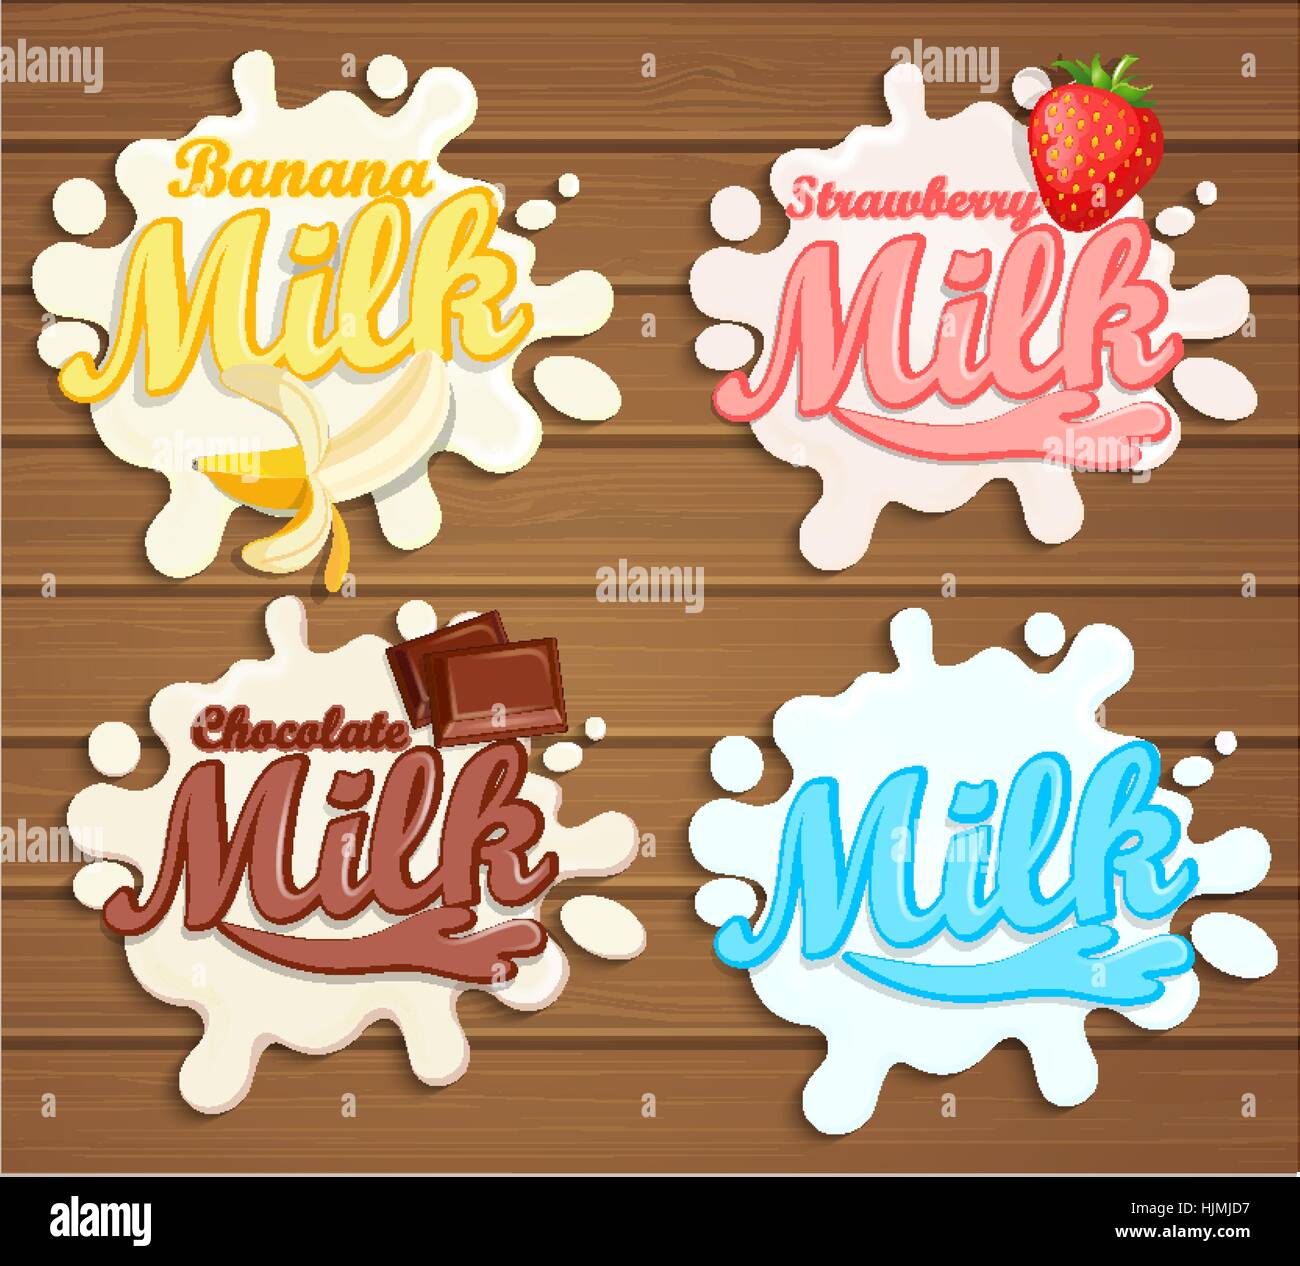 Chocolate, Banana, Strawberry milk labels splash. Blot and lettering on a wooden background. Vector illustration. Stock Vector